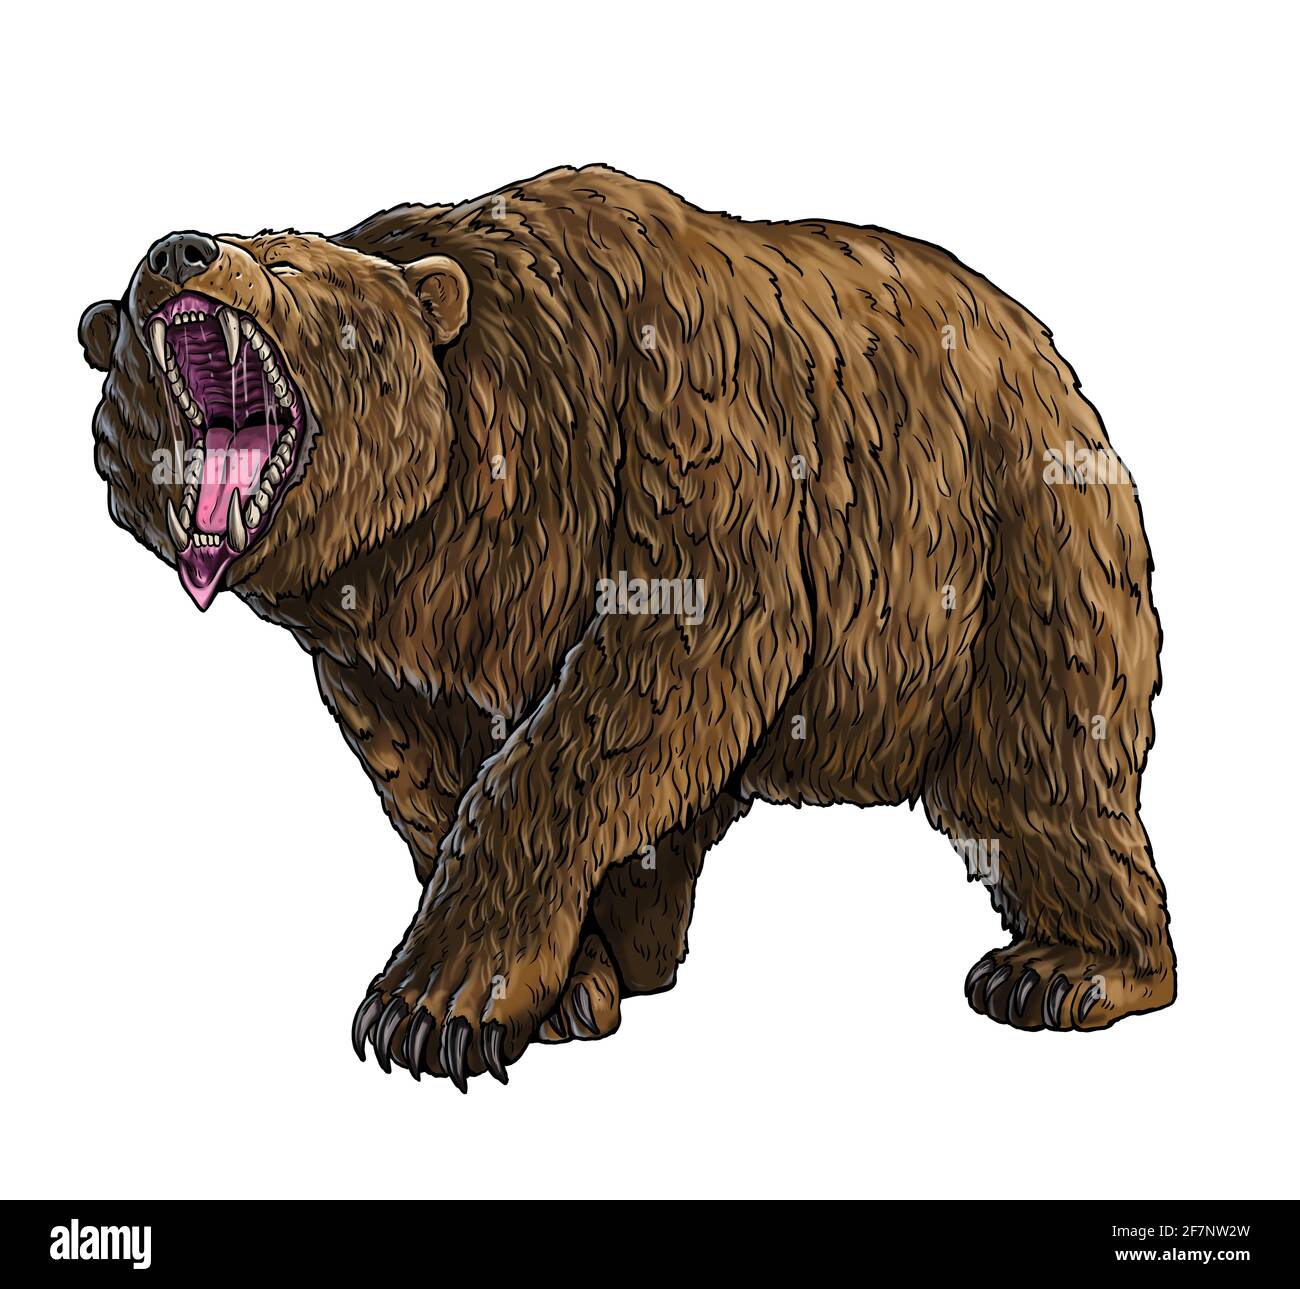 Grizzly bear, Cave bear illustration. Bear attack drawing. Stock Photo